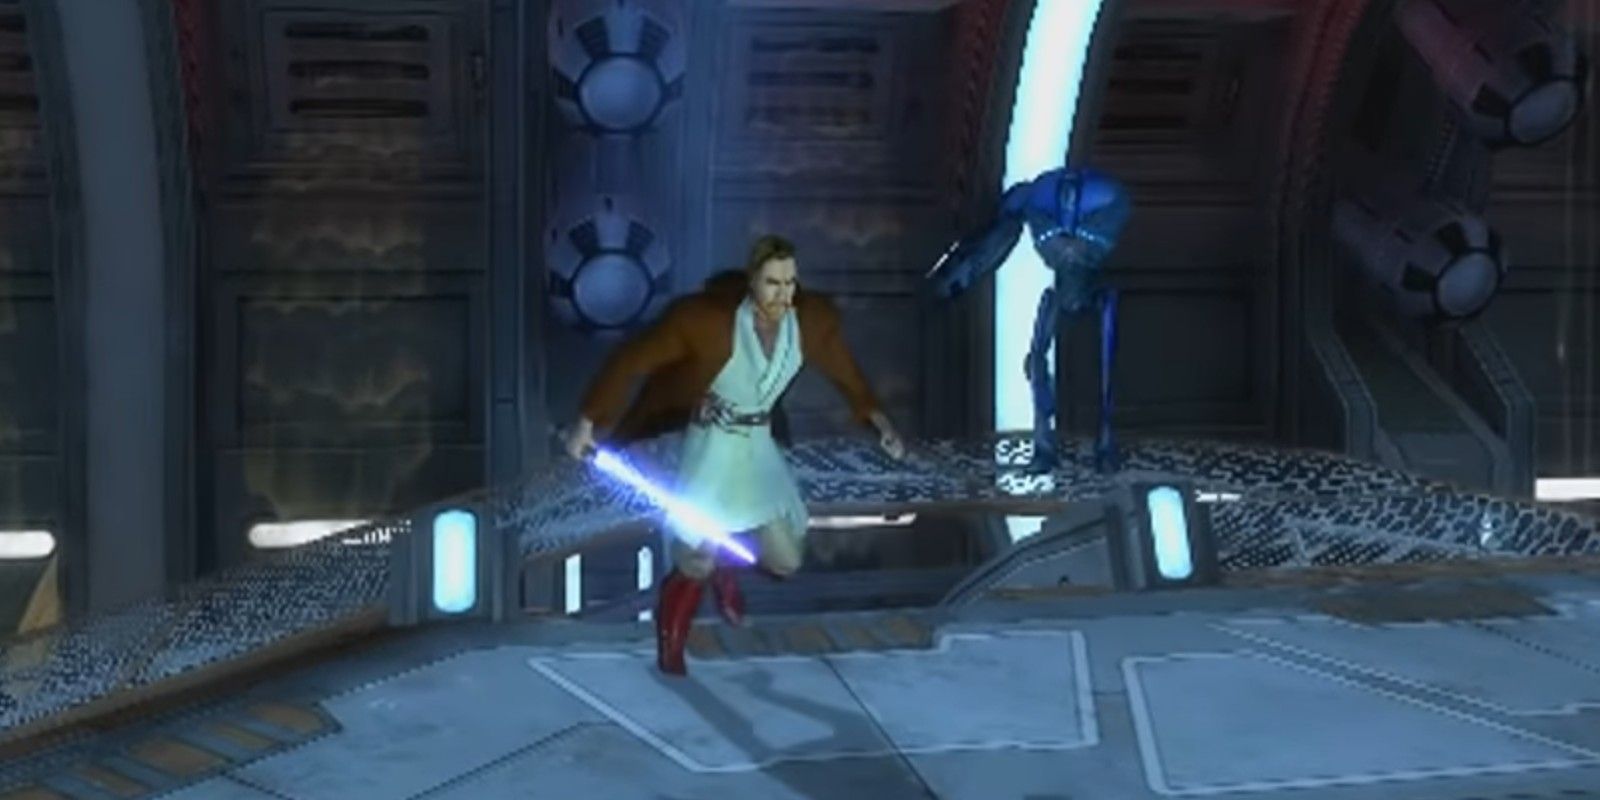 Star Wars Episode III Revenge of the Sith Featuring Obi Wan